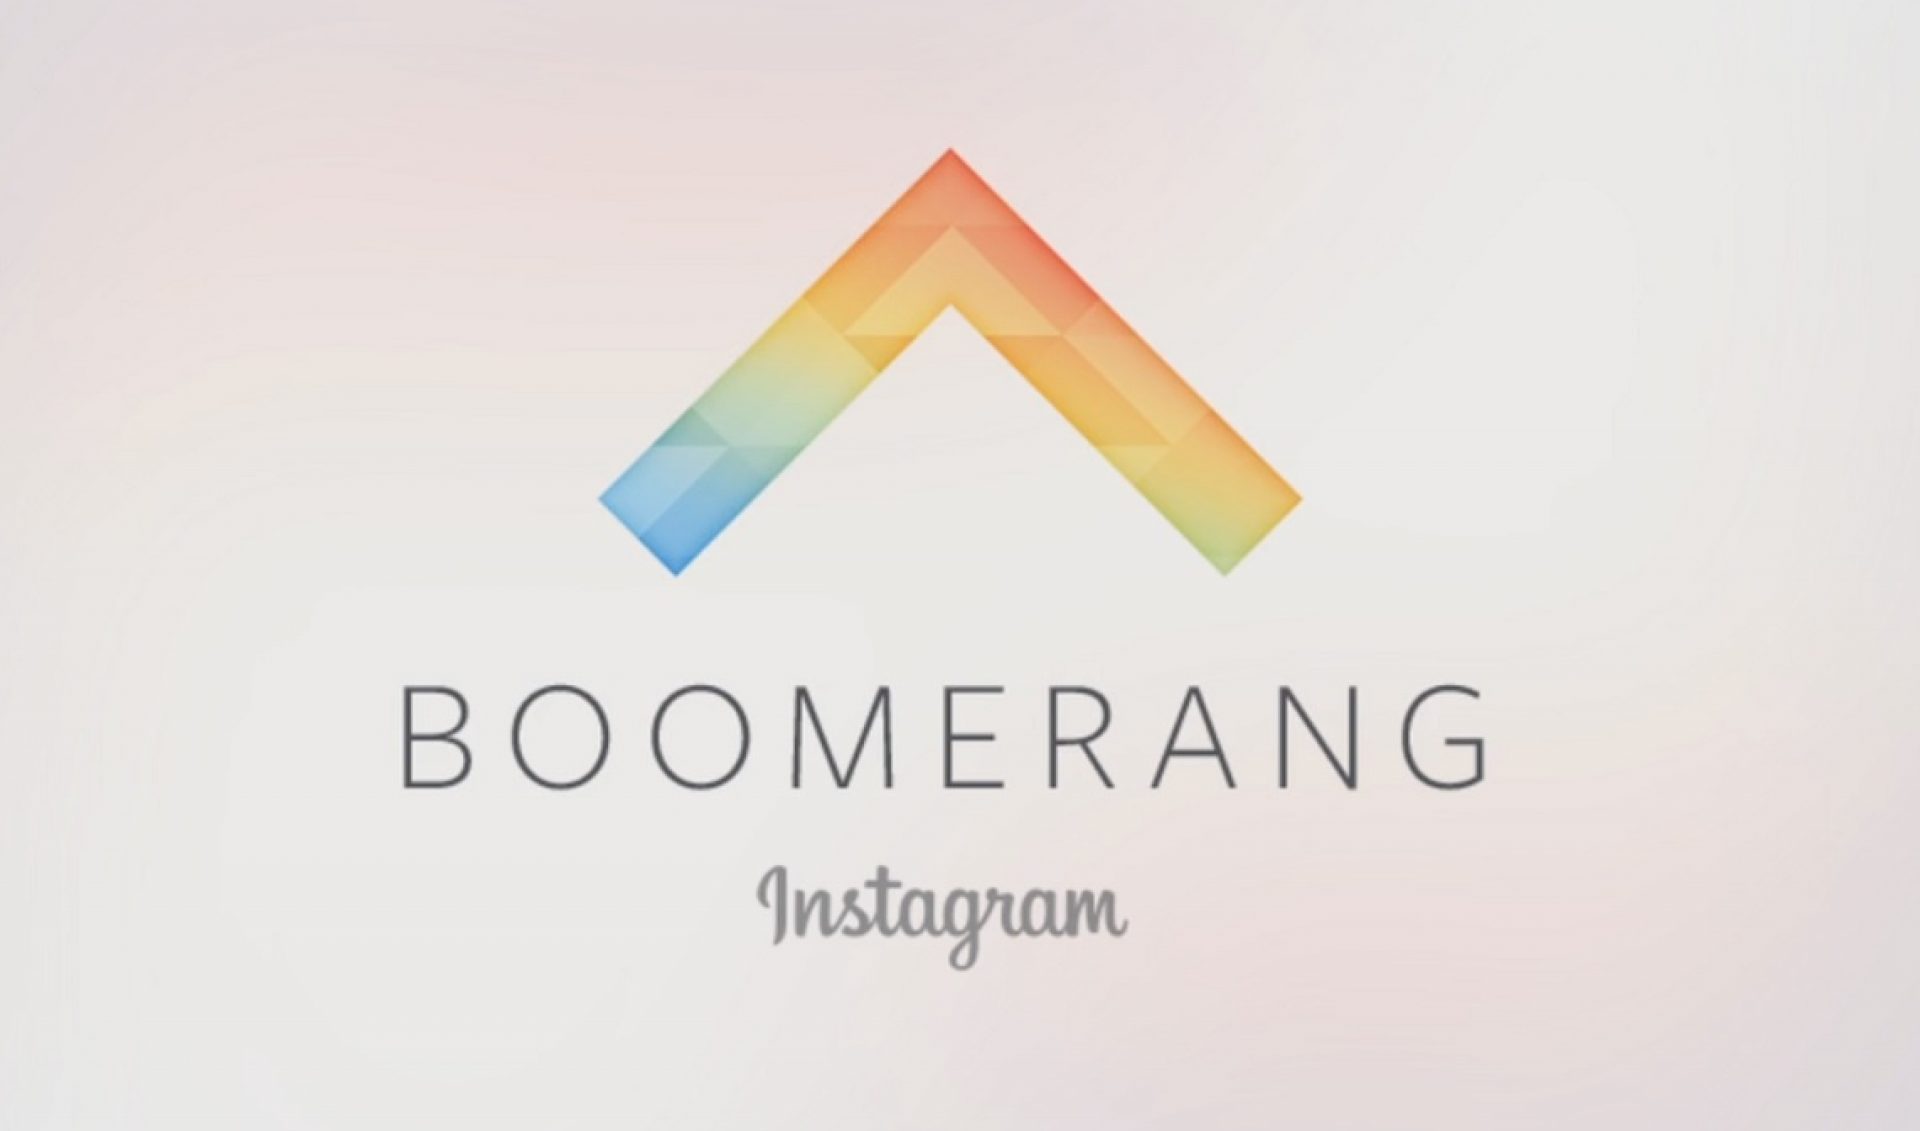 Instagram Introduces Boomerang App To Create One-Second Looping Clips